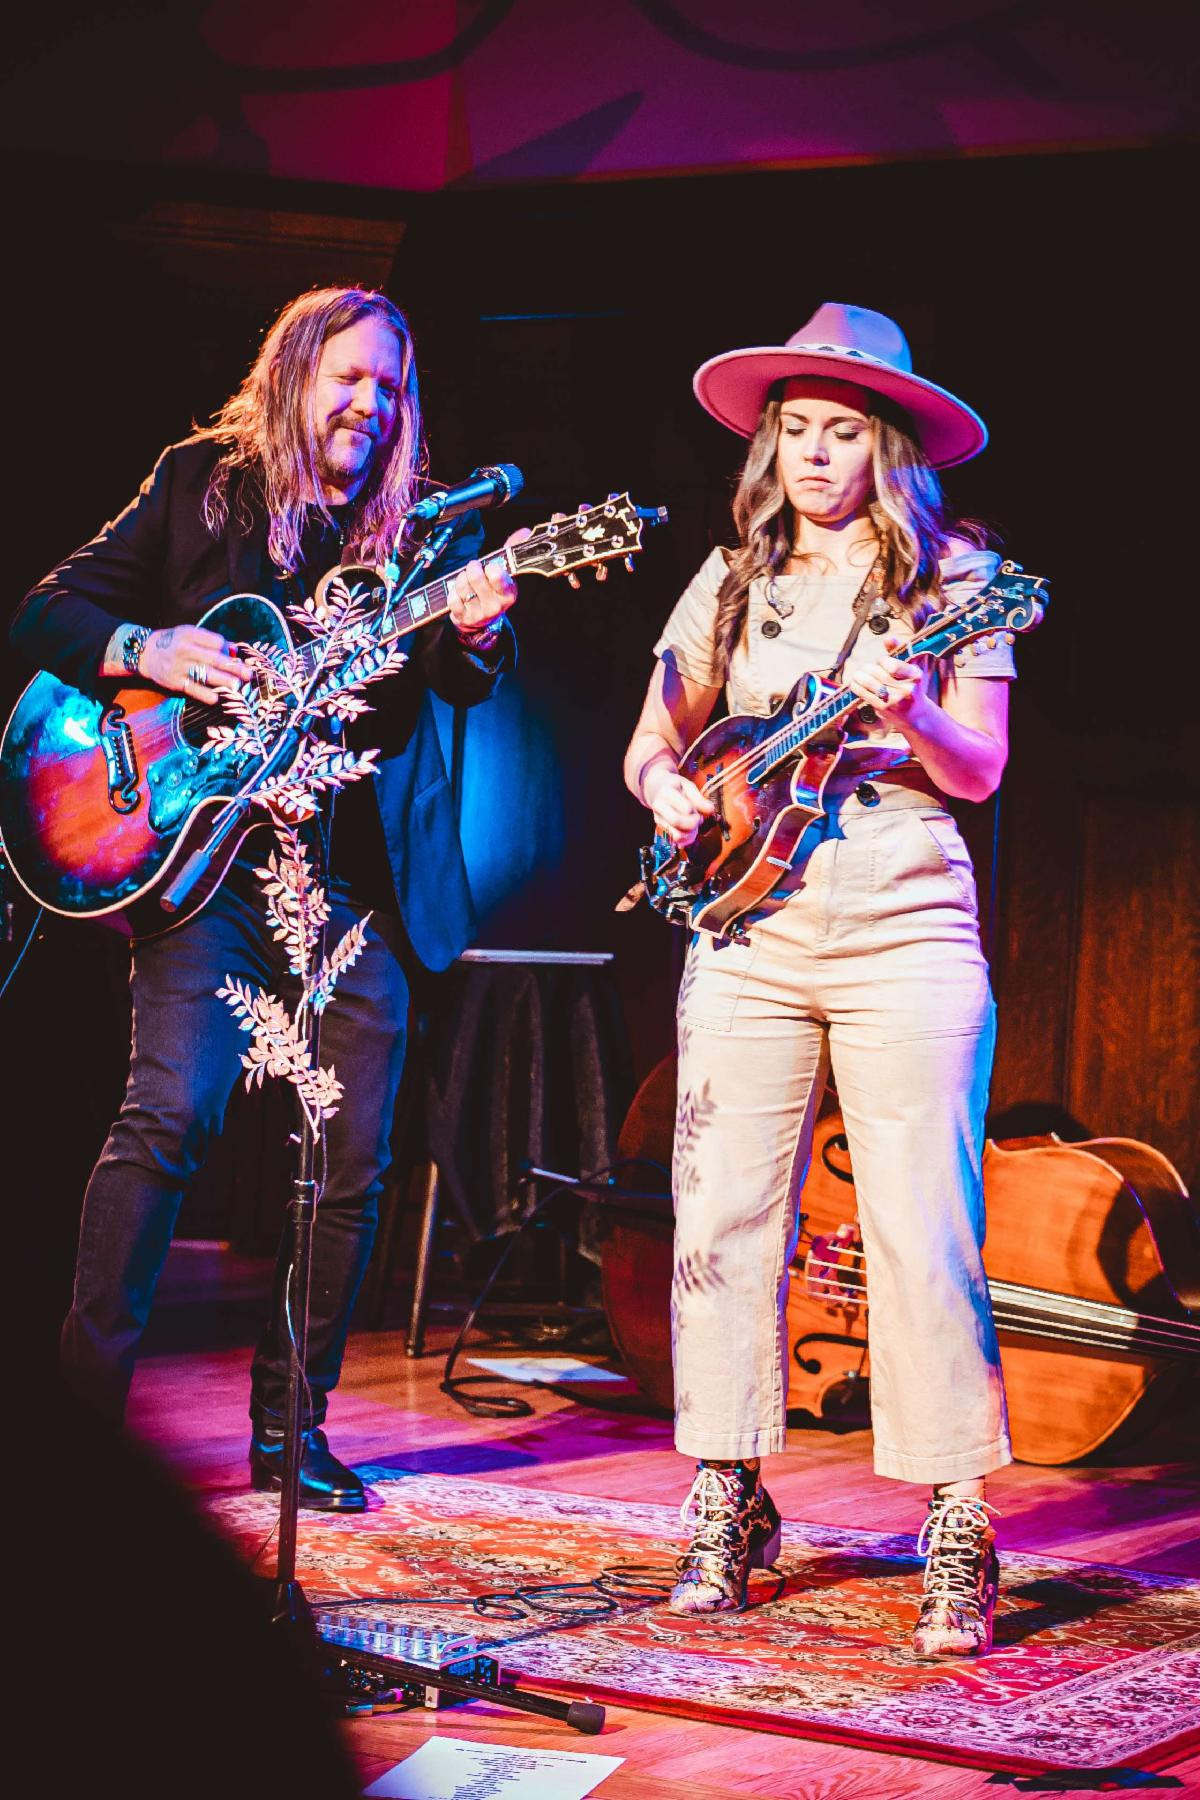 Devon Allman joins Sierra Hull in St. Louis to perform Allman Brothers classic "End of the Line"